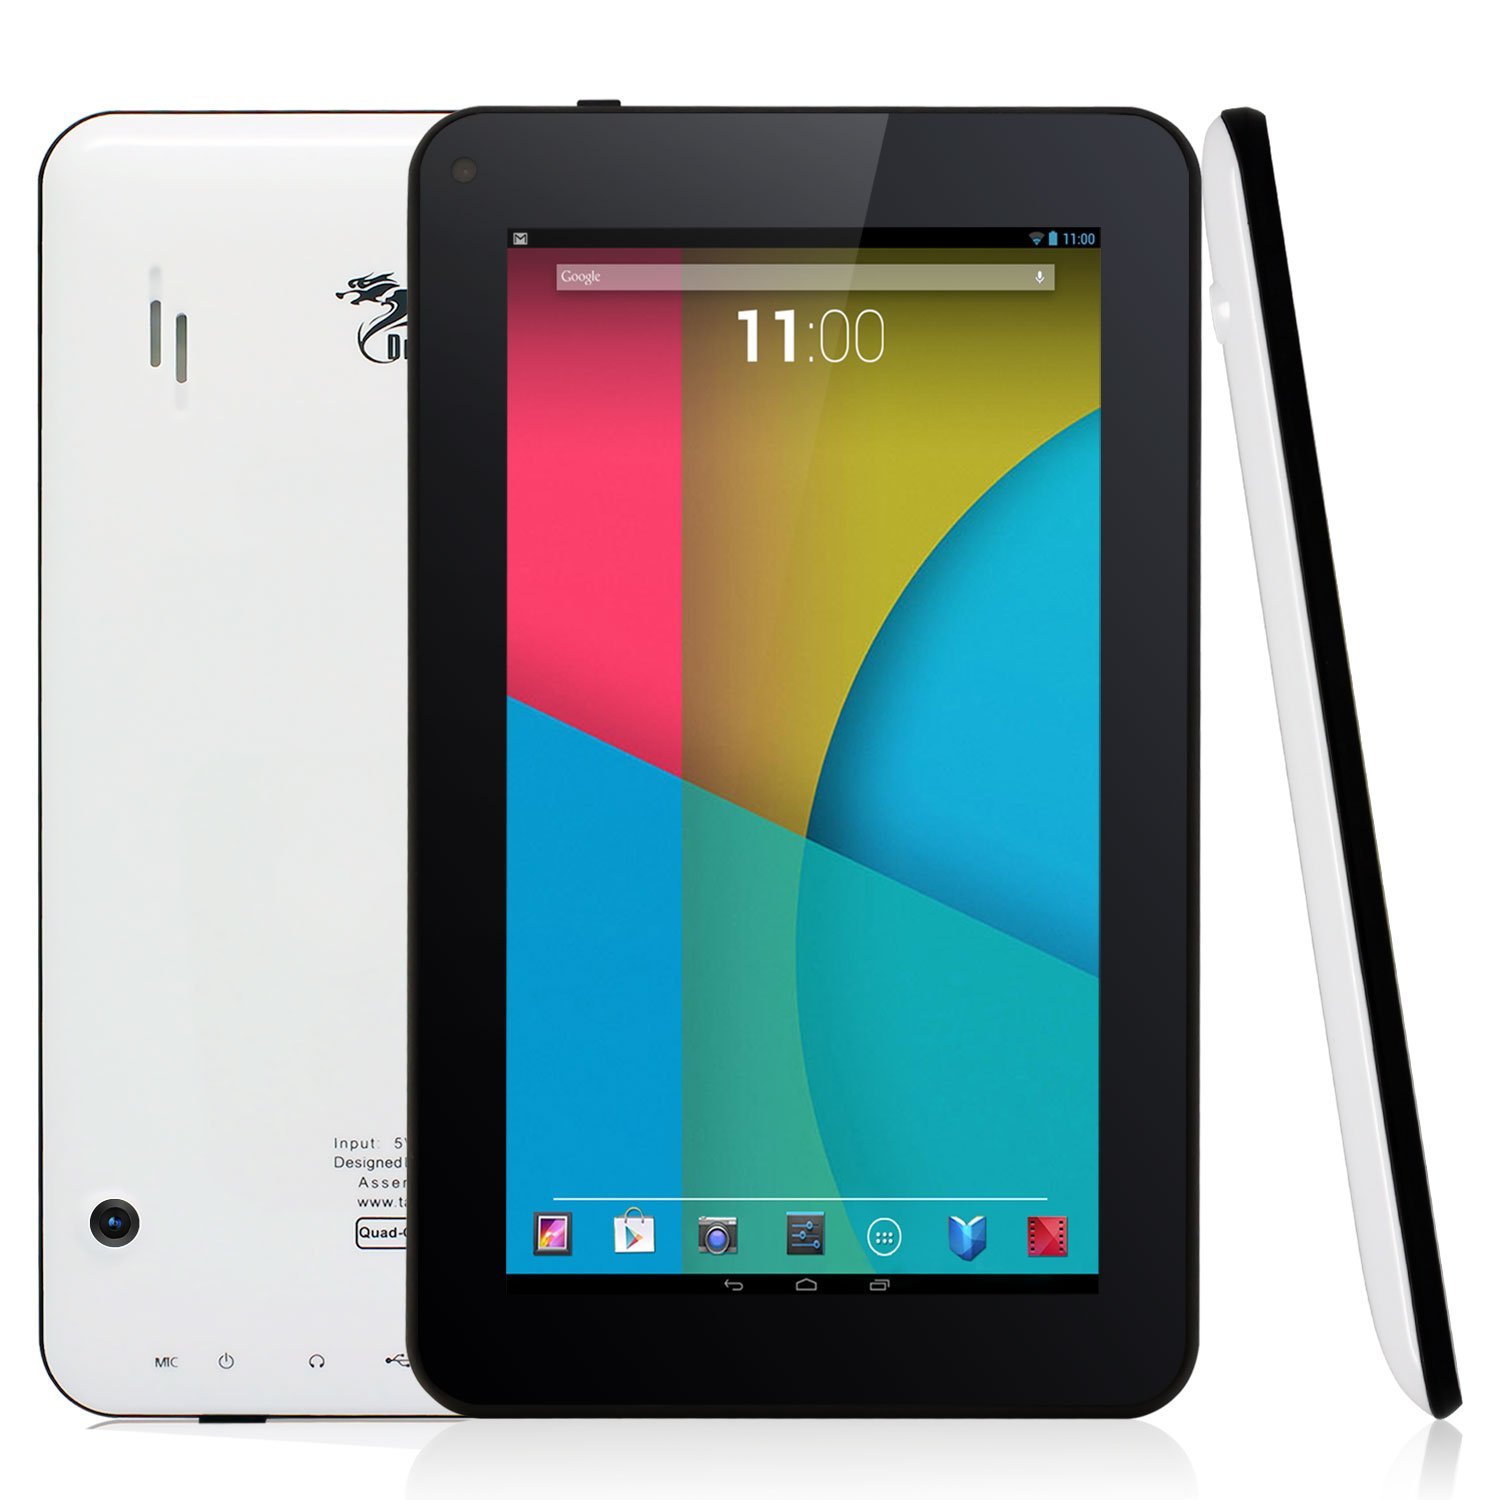 Dragon Touch M7 7 inch Quad Core IPS Tablet